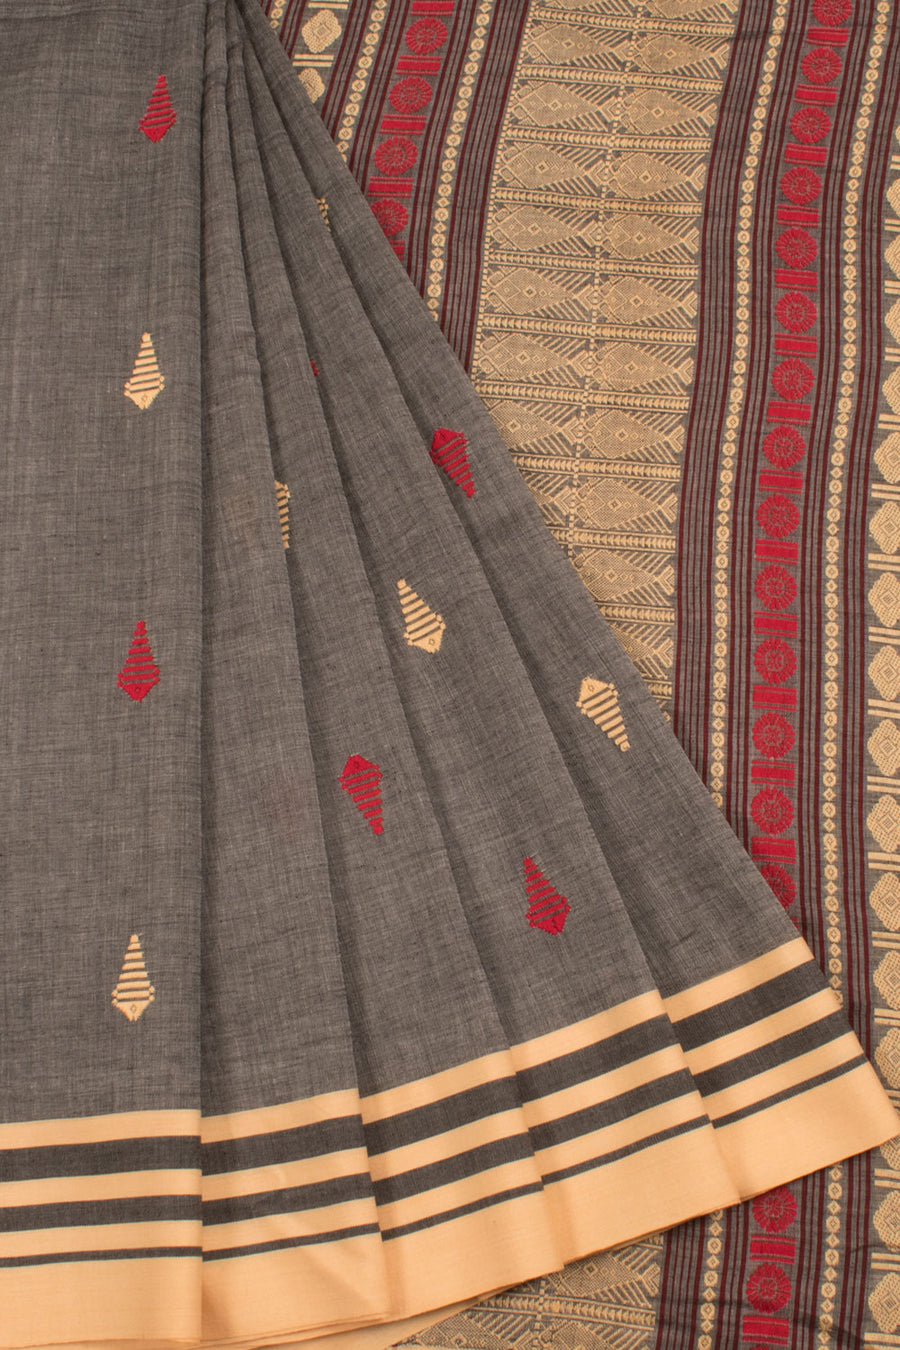 Handloom Bengal Cotton Saree with All Over Fish Motifs and Stripes Border